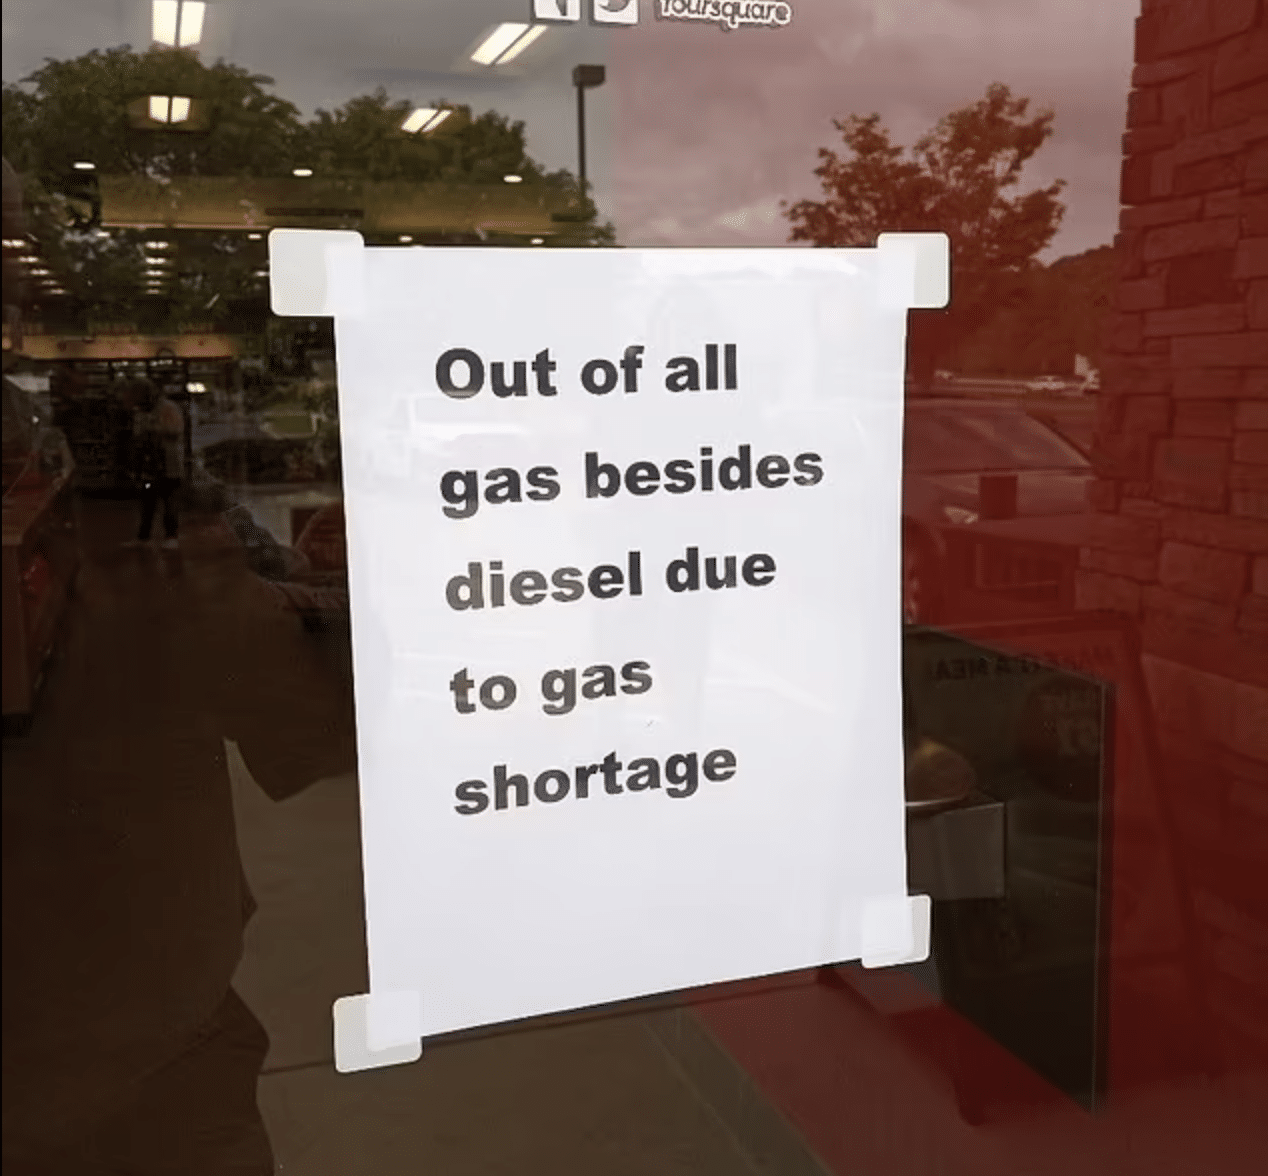 Gas stations running out of gas following cyber attack, Cars lining up